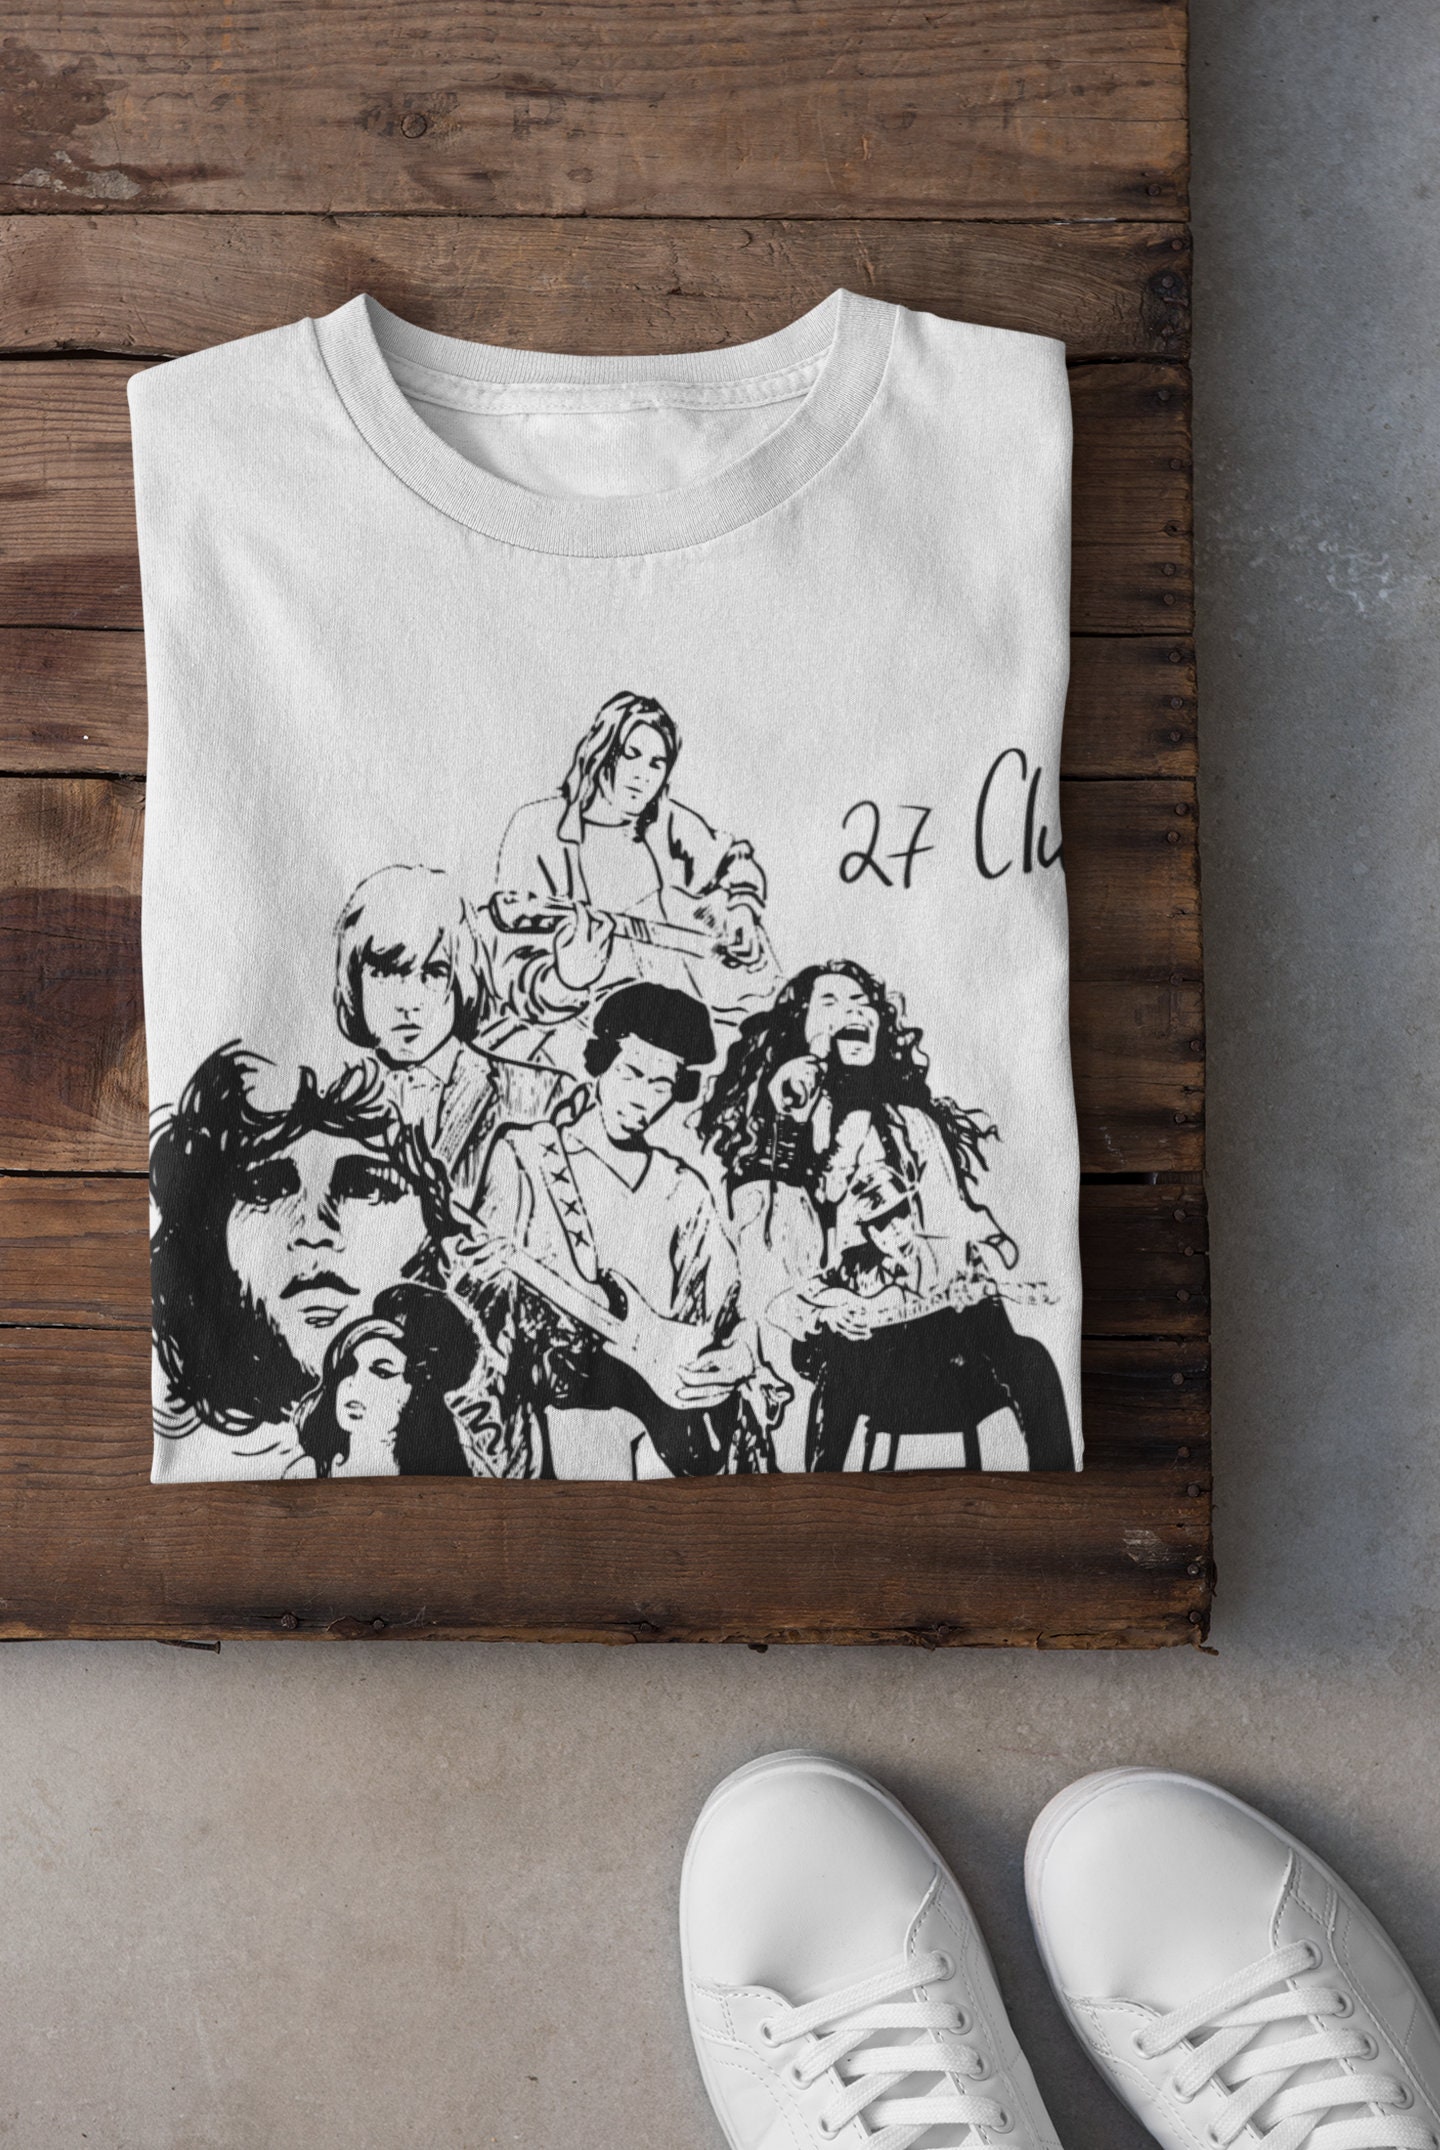 27 Club Forever 27 With Legendary Music Icons Who Died At The Age Of 27 Unisex T-Shirt